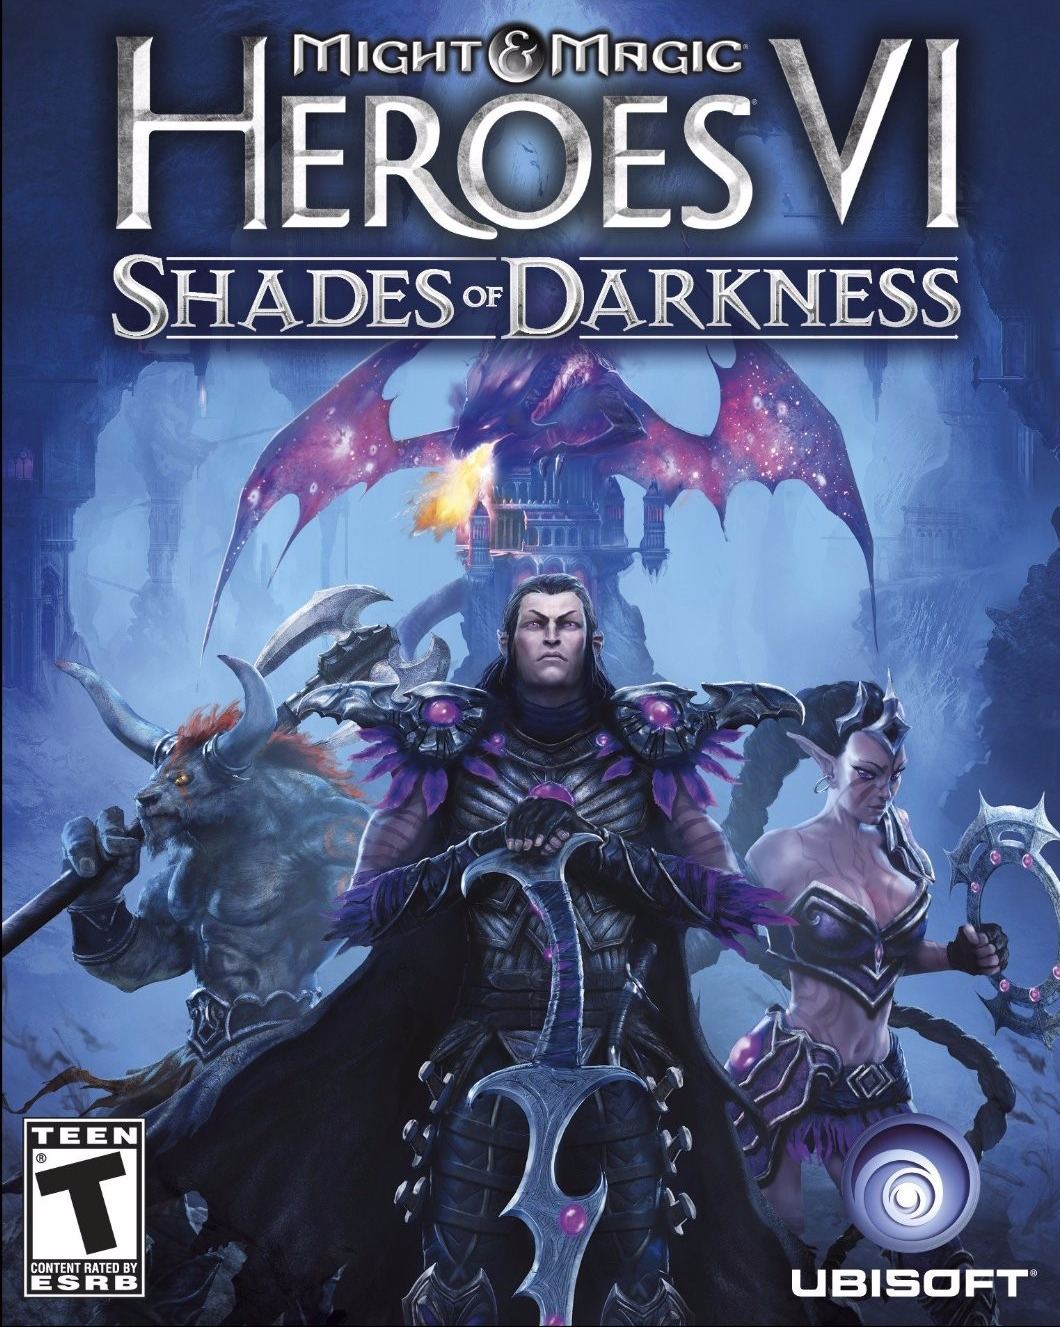 download free heroes 6 shades of darkness